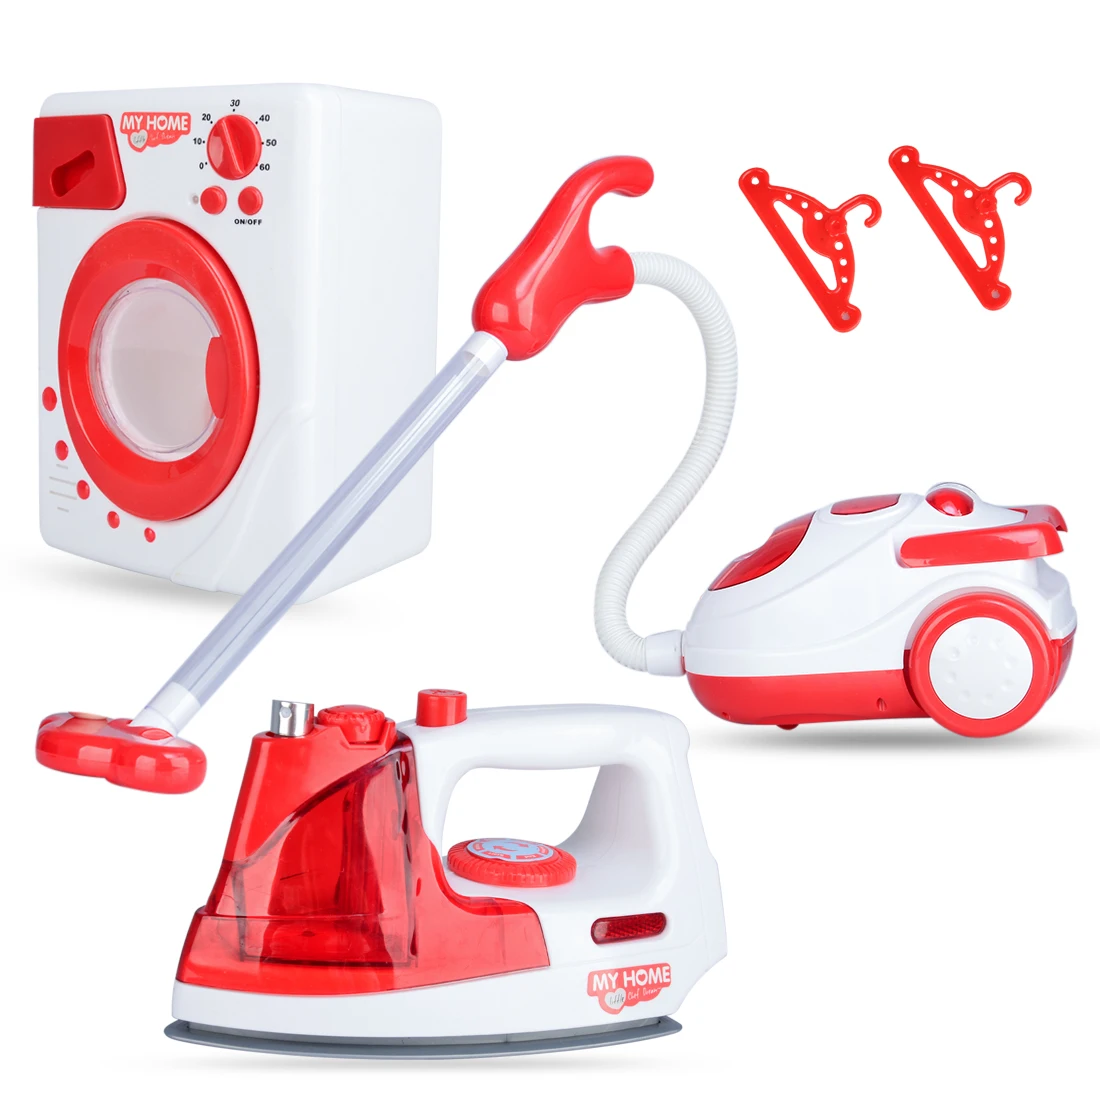 

3 Pcs Children's Household Appliances Set of Iron Vacuum Cleaner Washing Machine Children's toy set for Playing House - Red